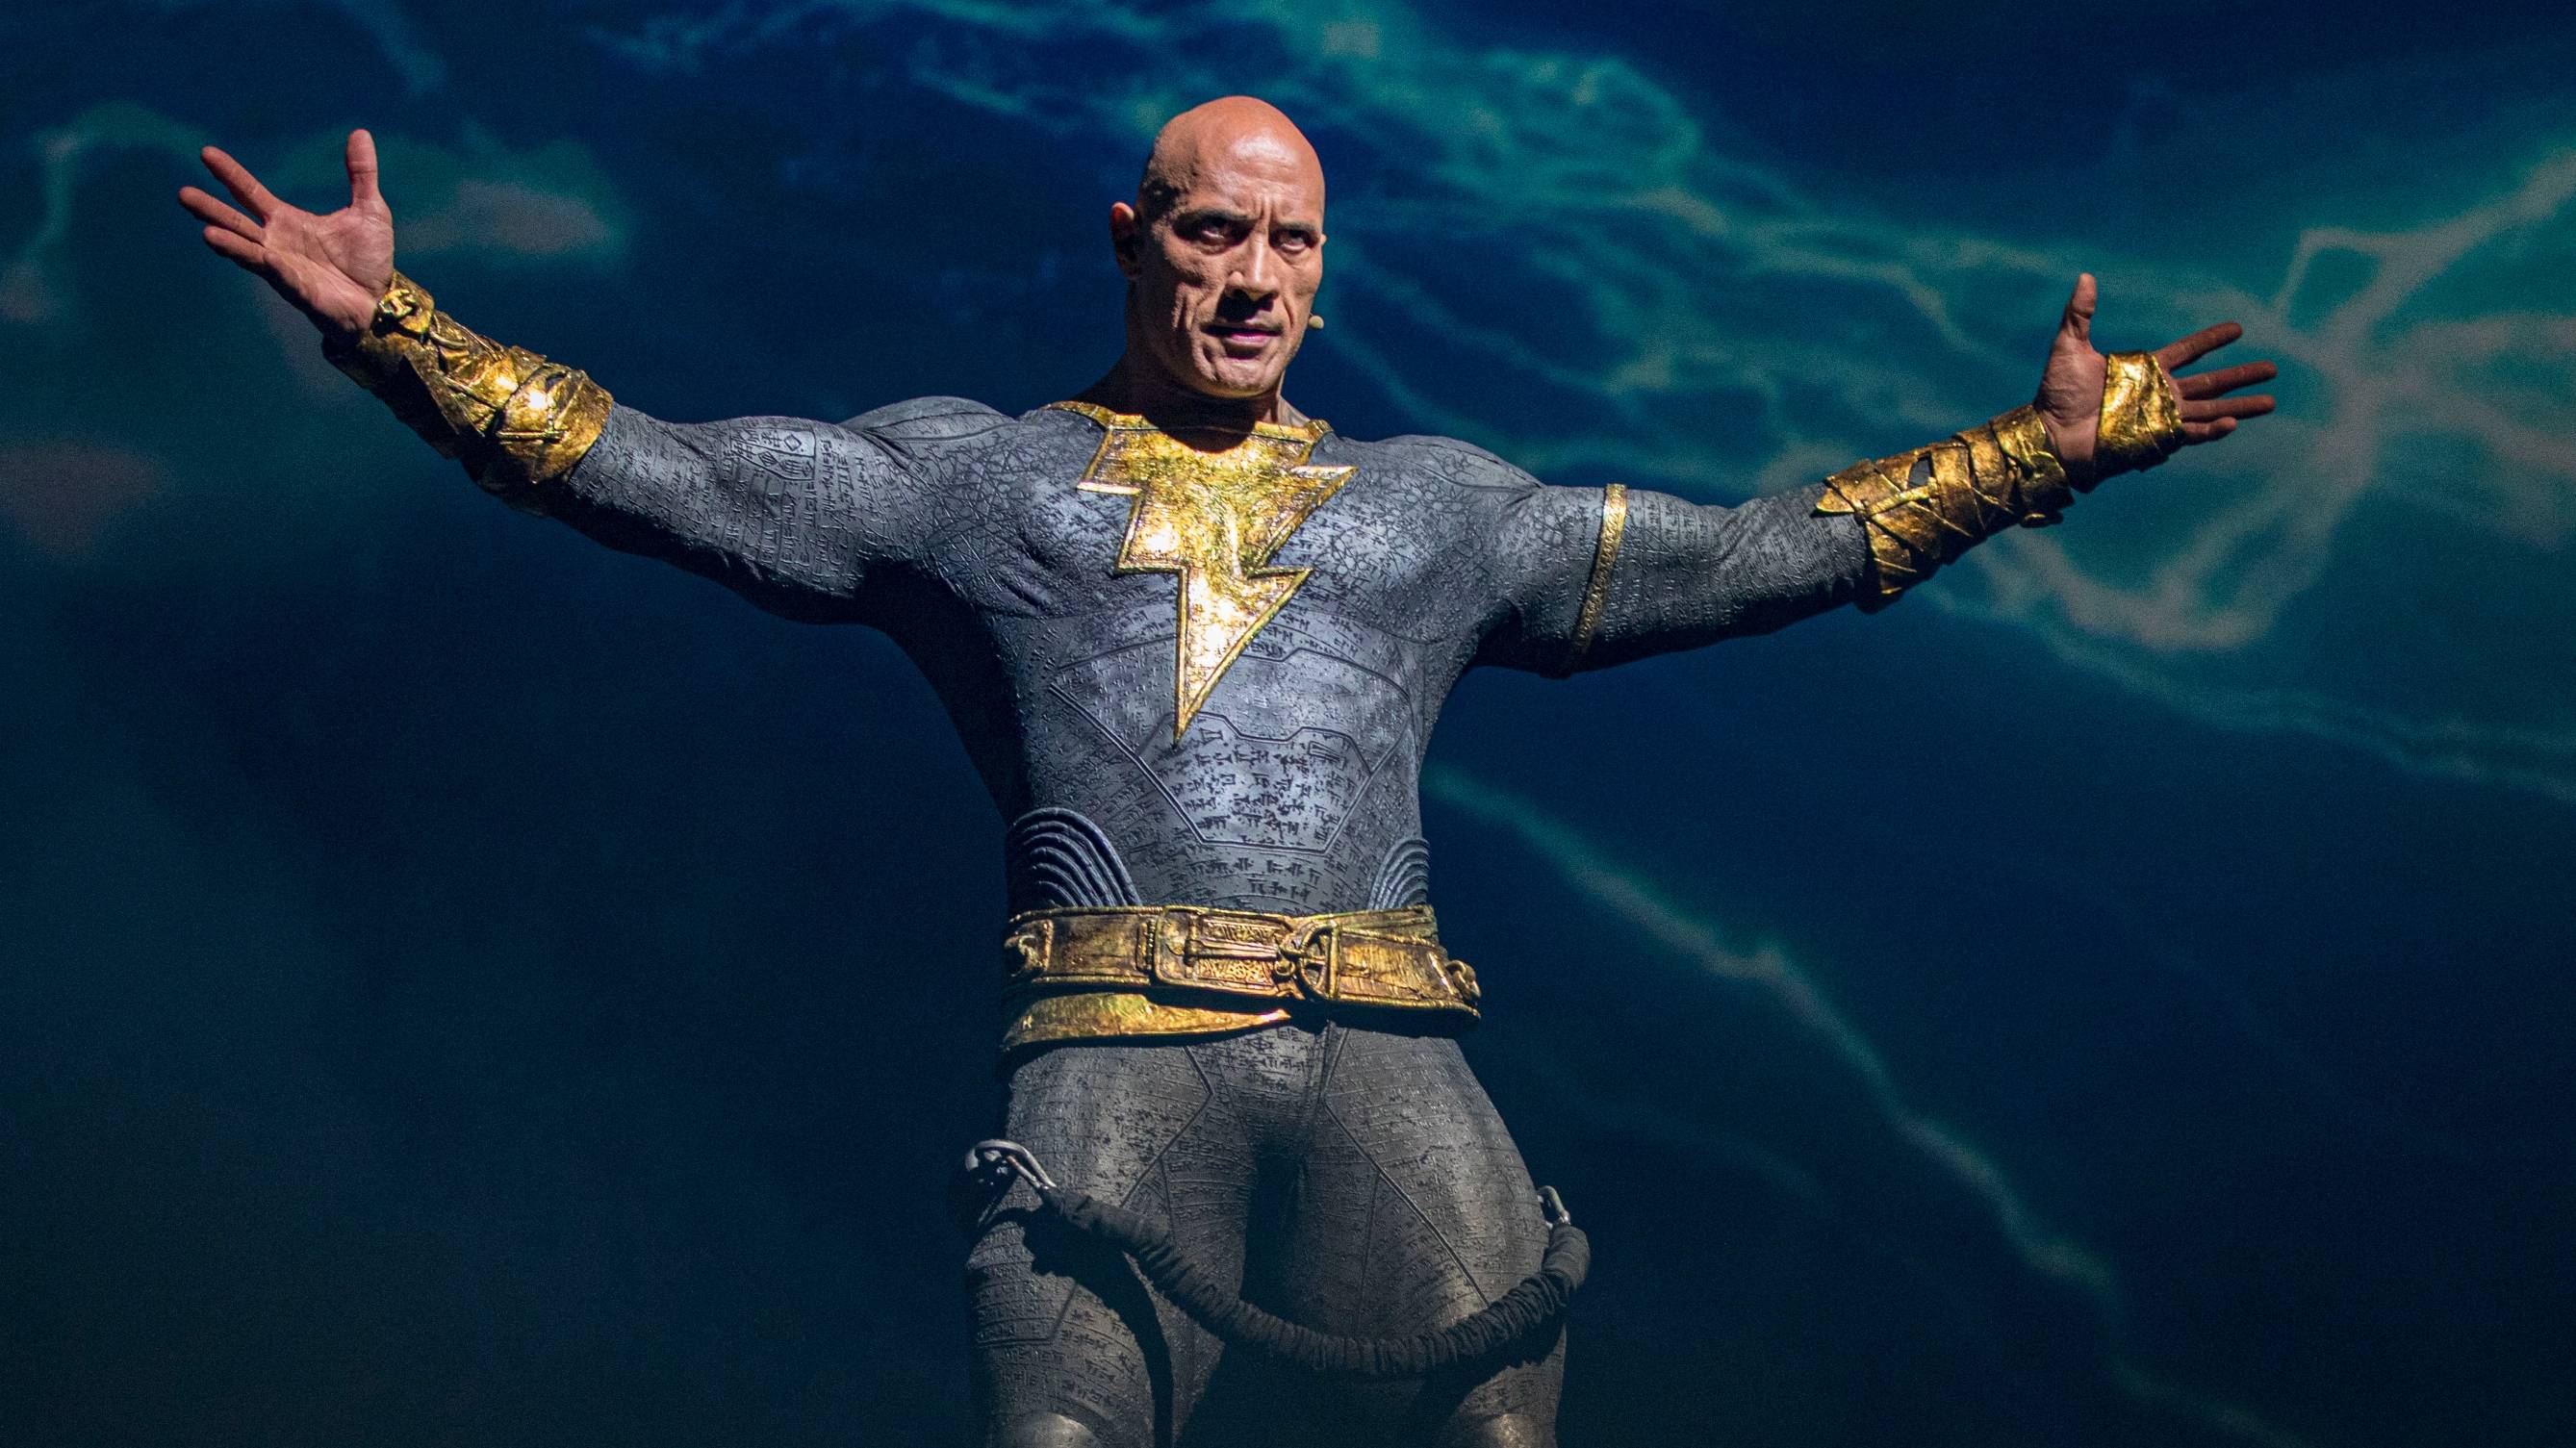 Dwayne "The Rock" Johnson at the Warner Brothers panel promoting his upcoming film "Black Adam" at 2022 Comic-Con on July 23, 2022.